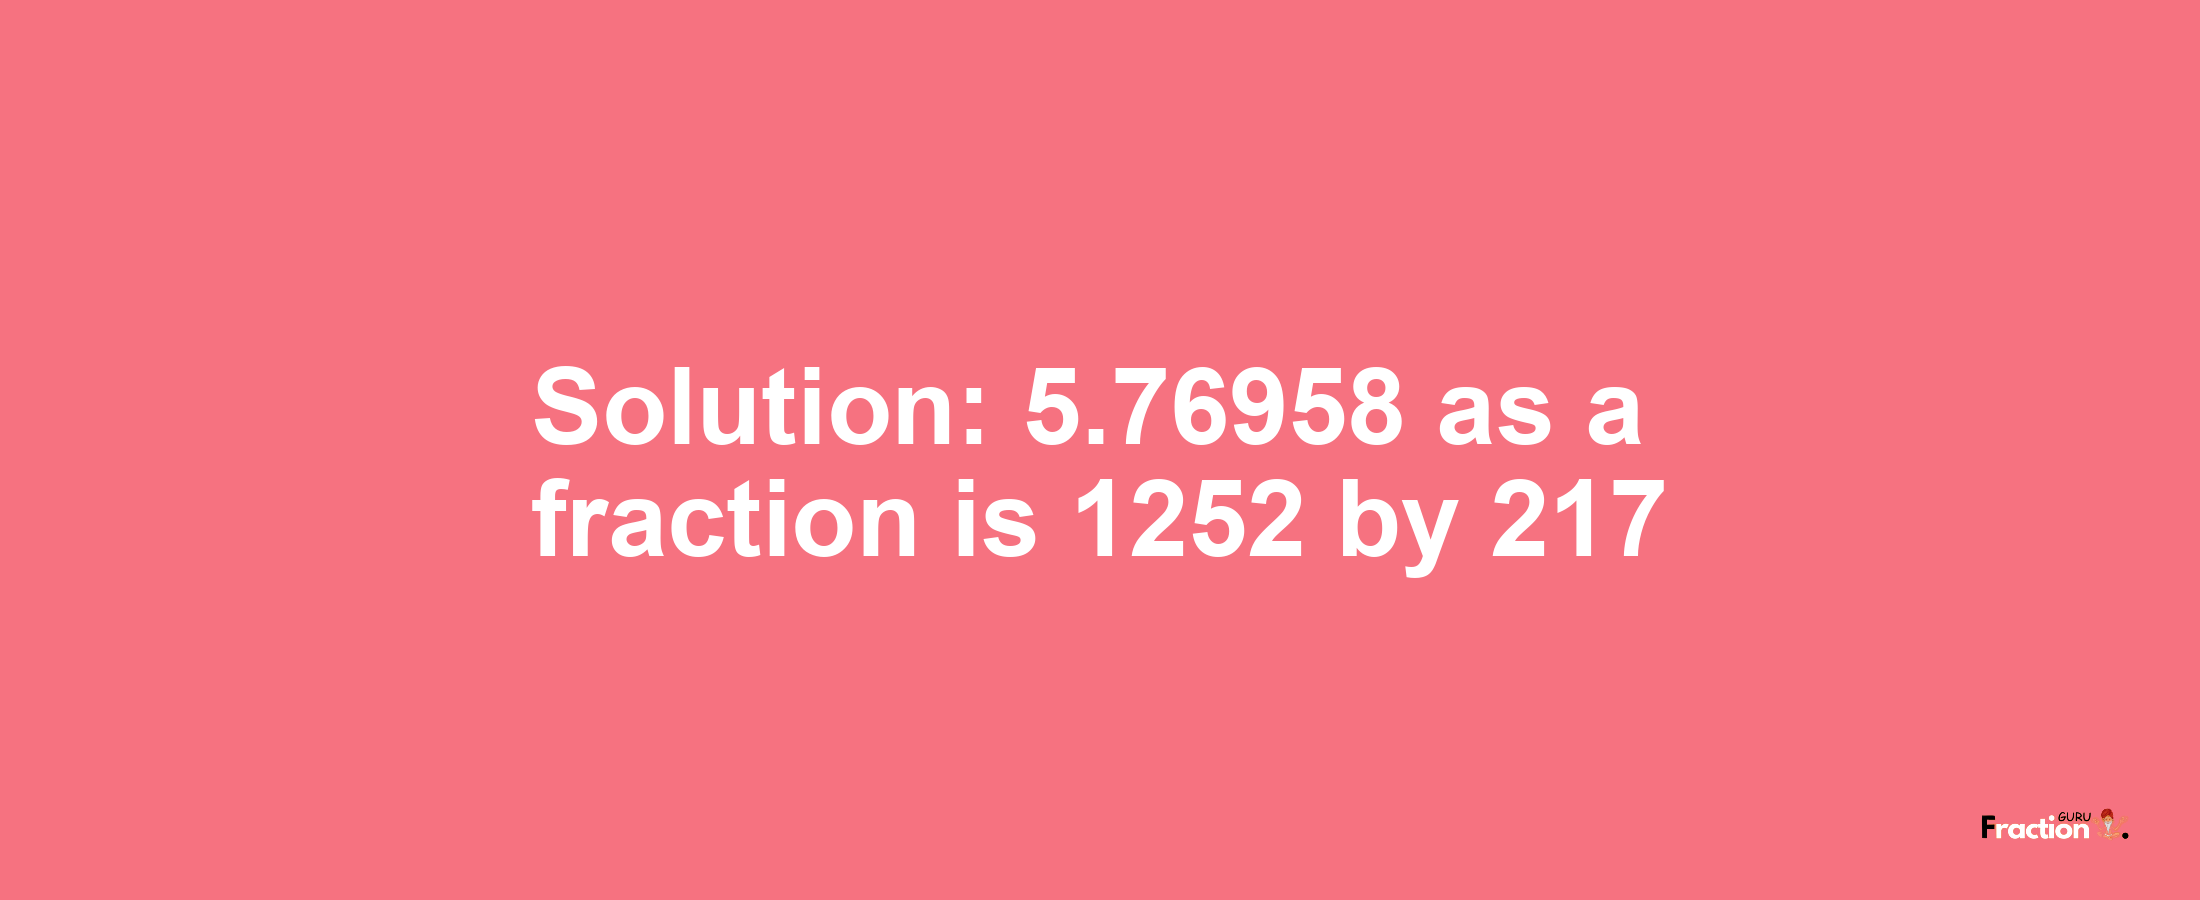 Solution:5.76958 as a fraction is 1252/217